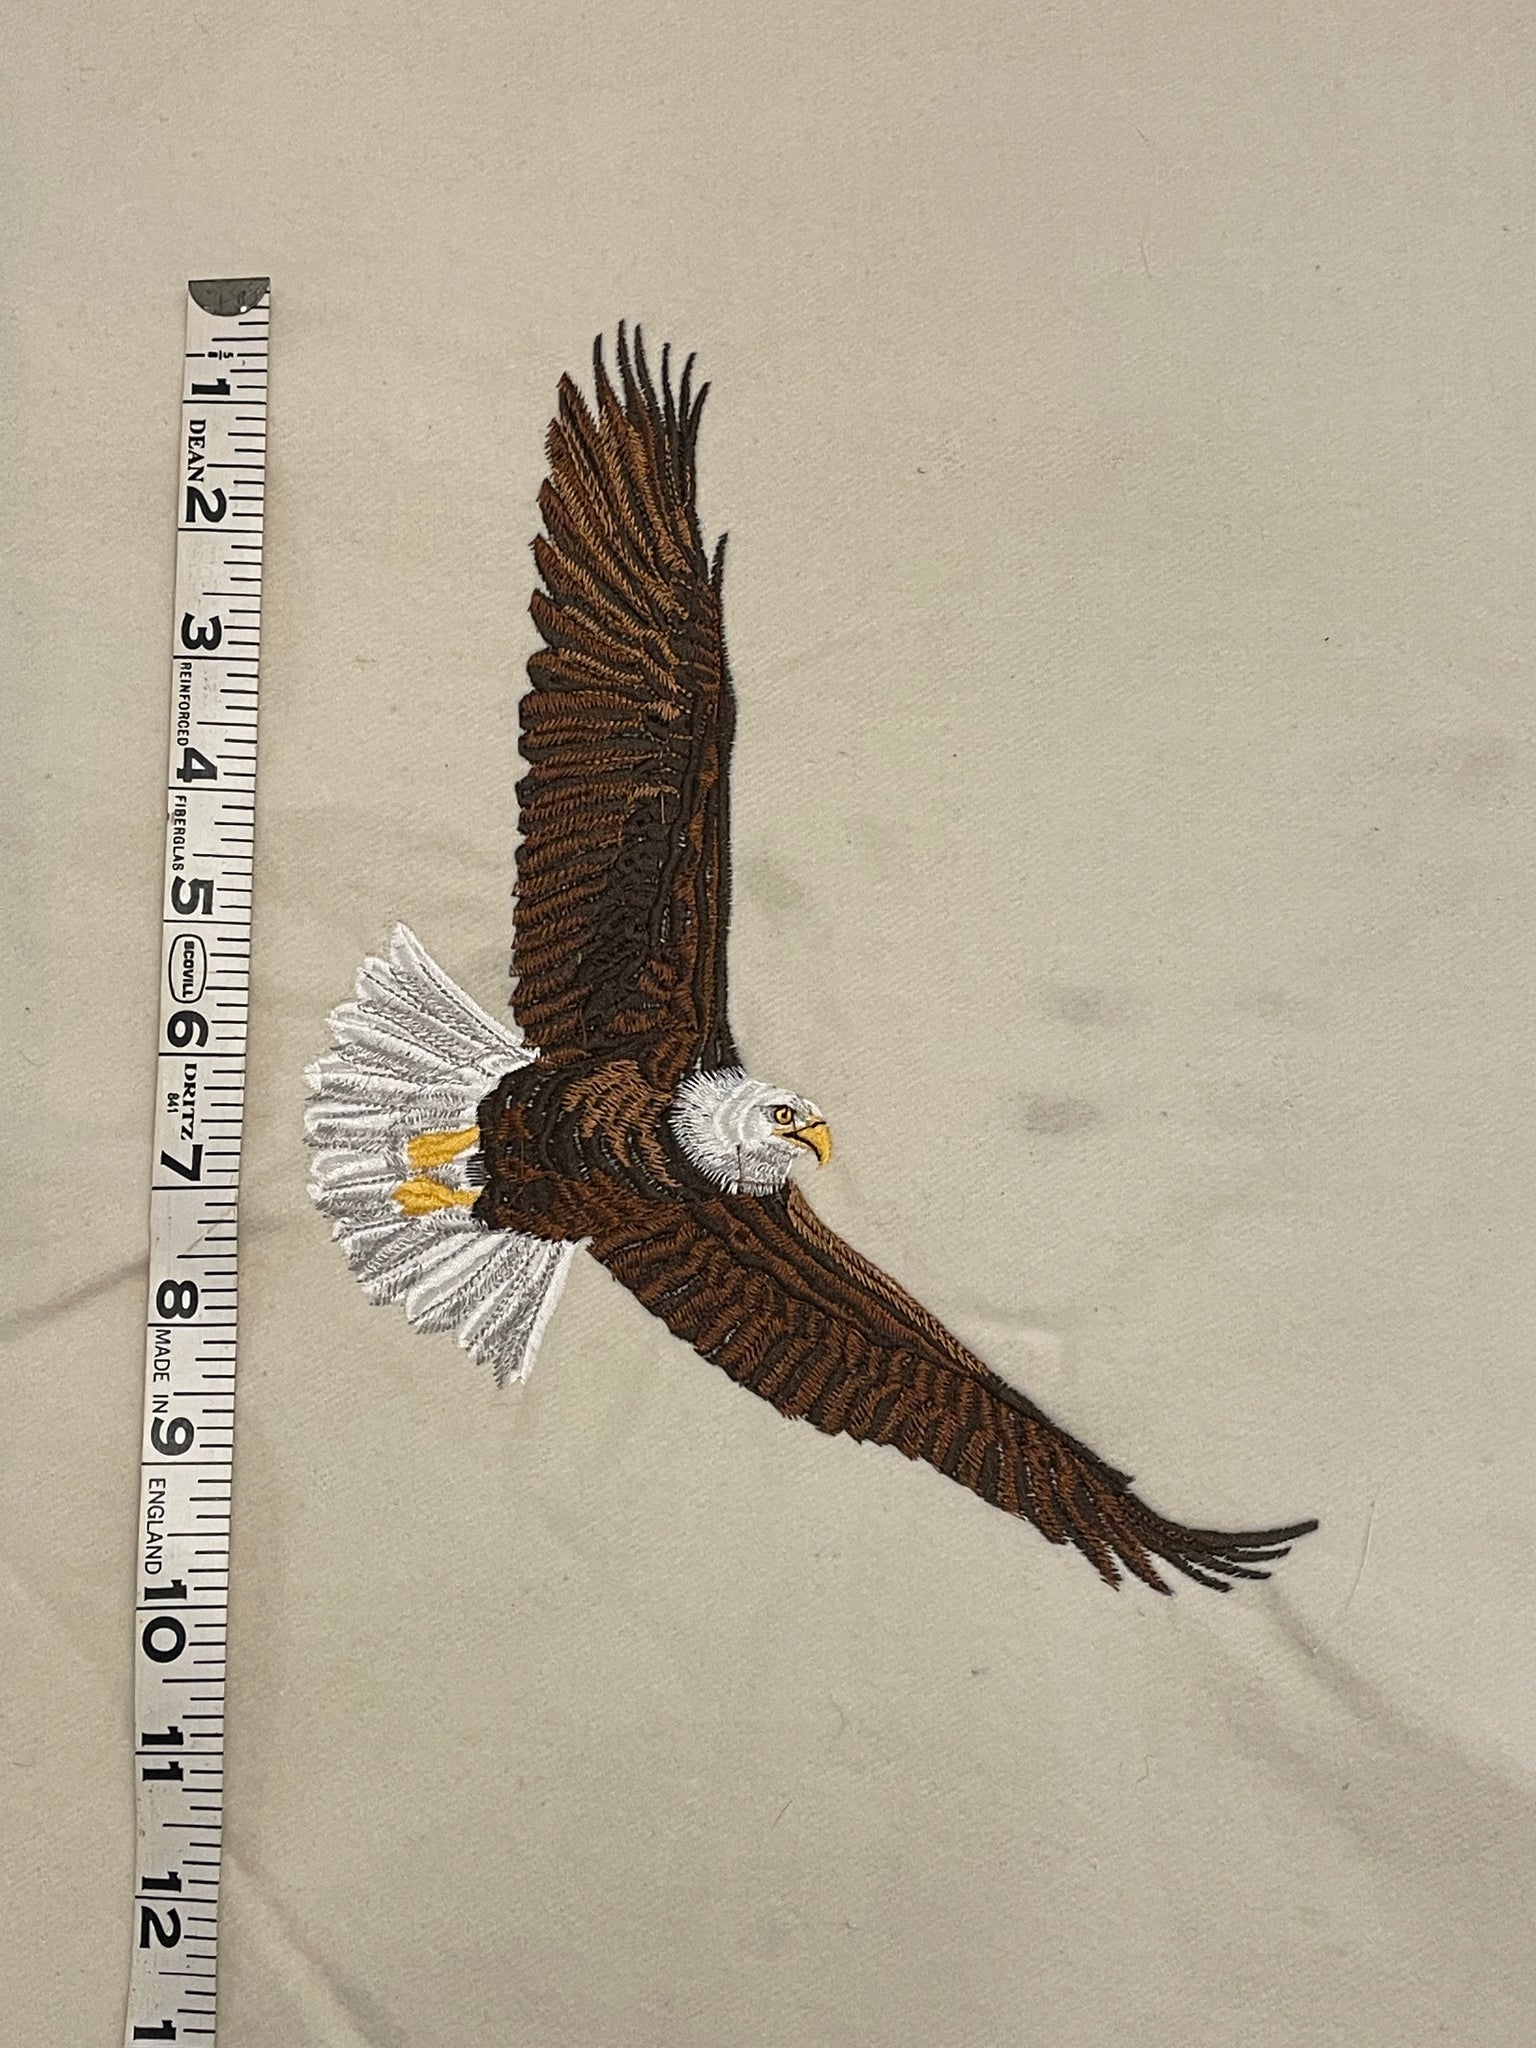 SALE Machine Embroidery Panel on Flannel - Bald Eagle on Cream or Light Blue